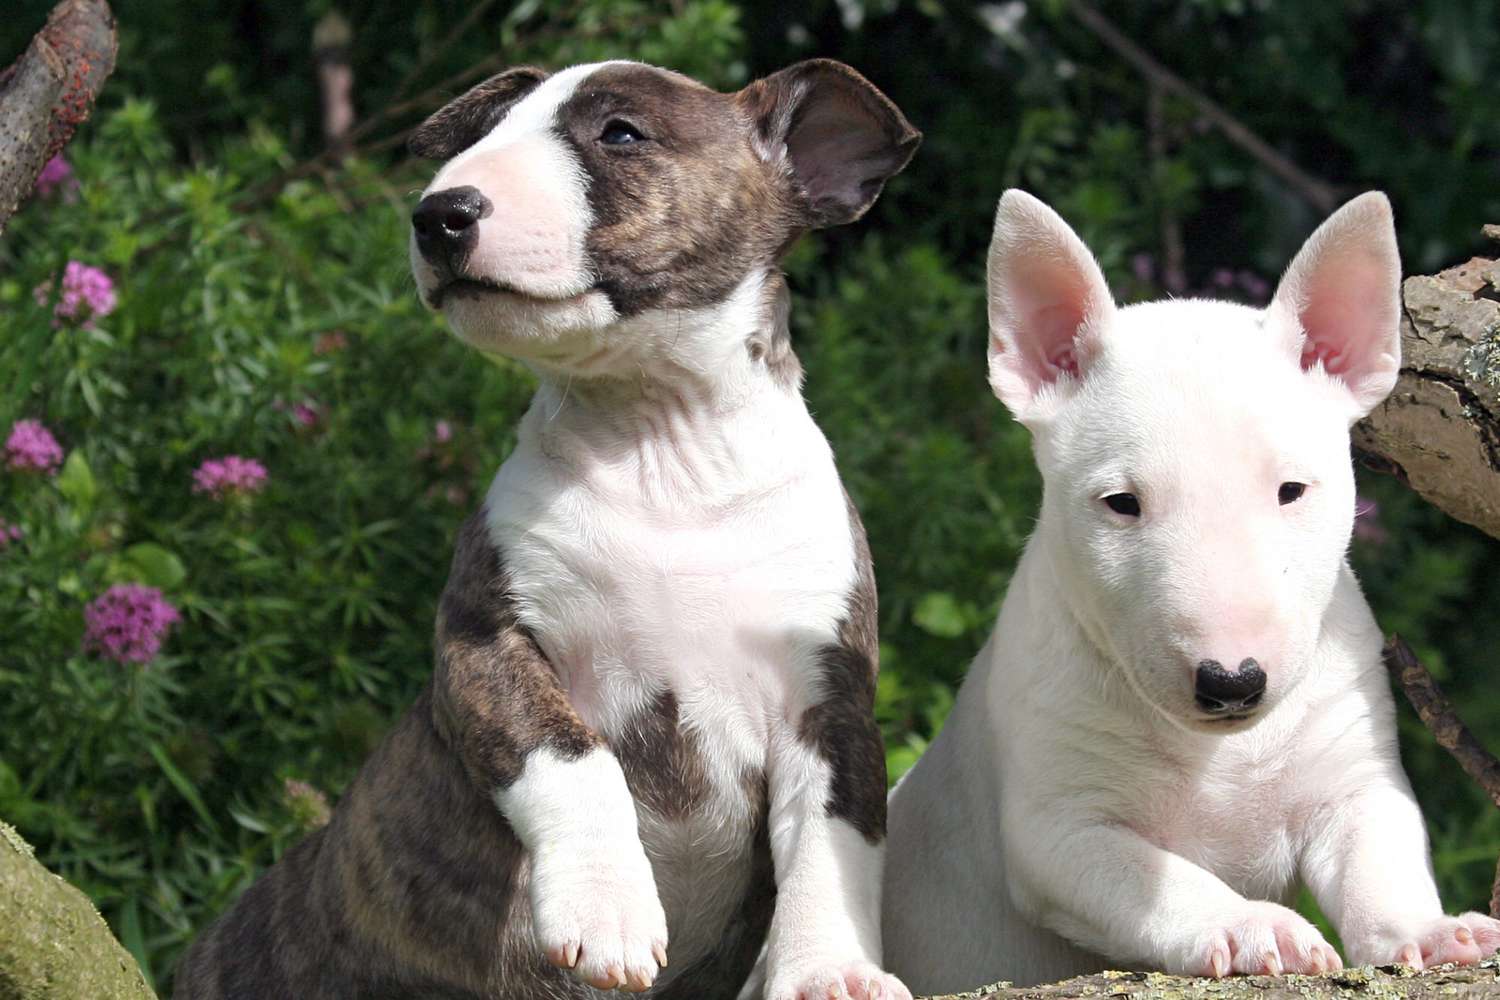 Miniature Bull Terrier Dog Breed Information Characteristics | Daily Paws